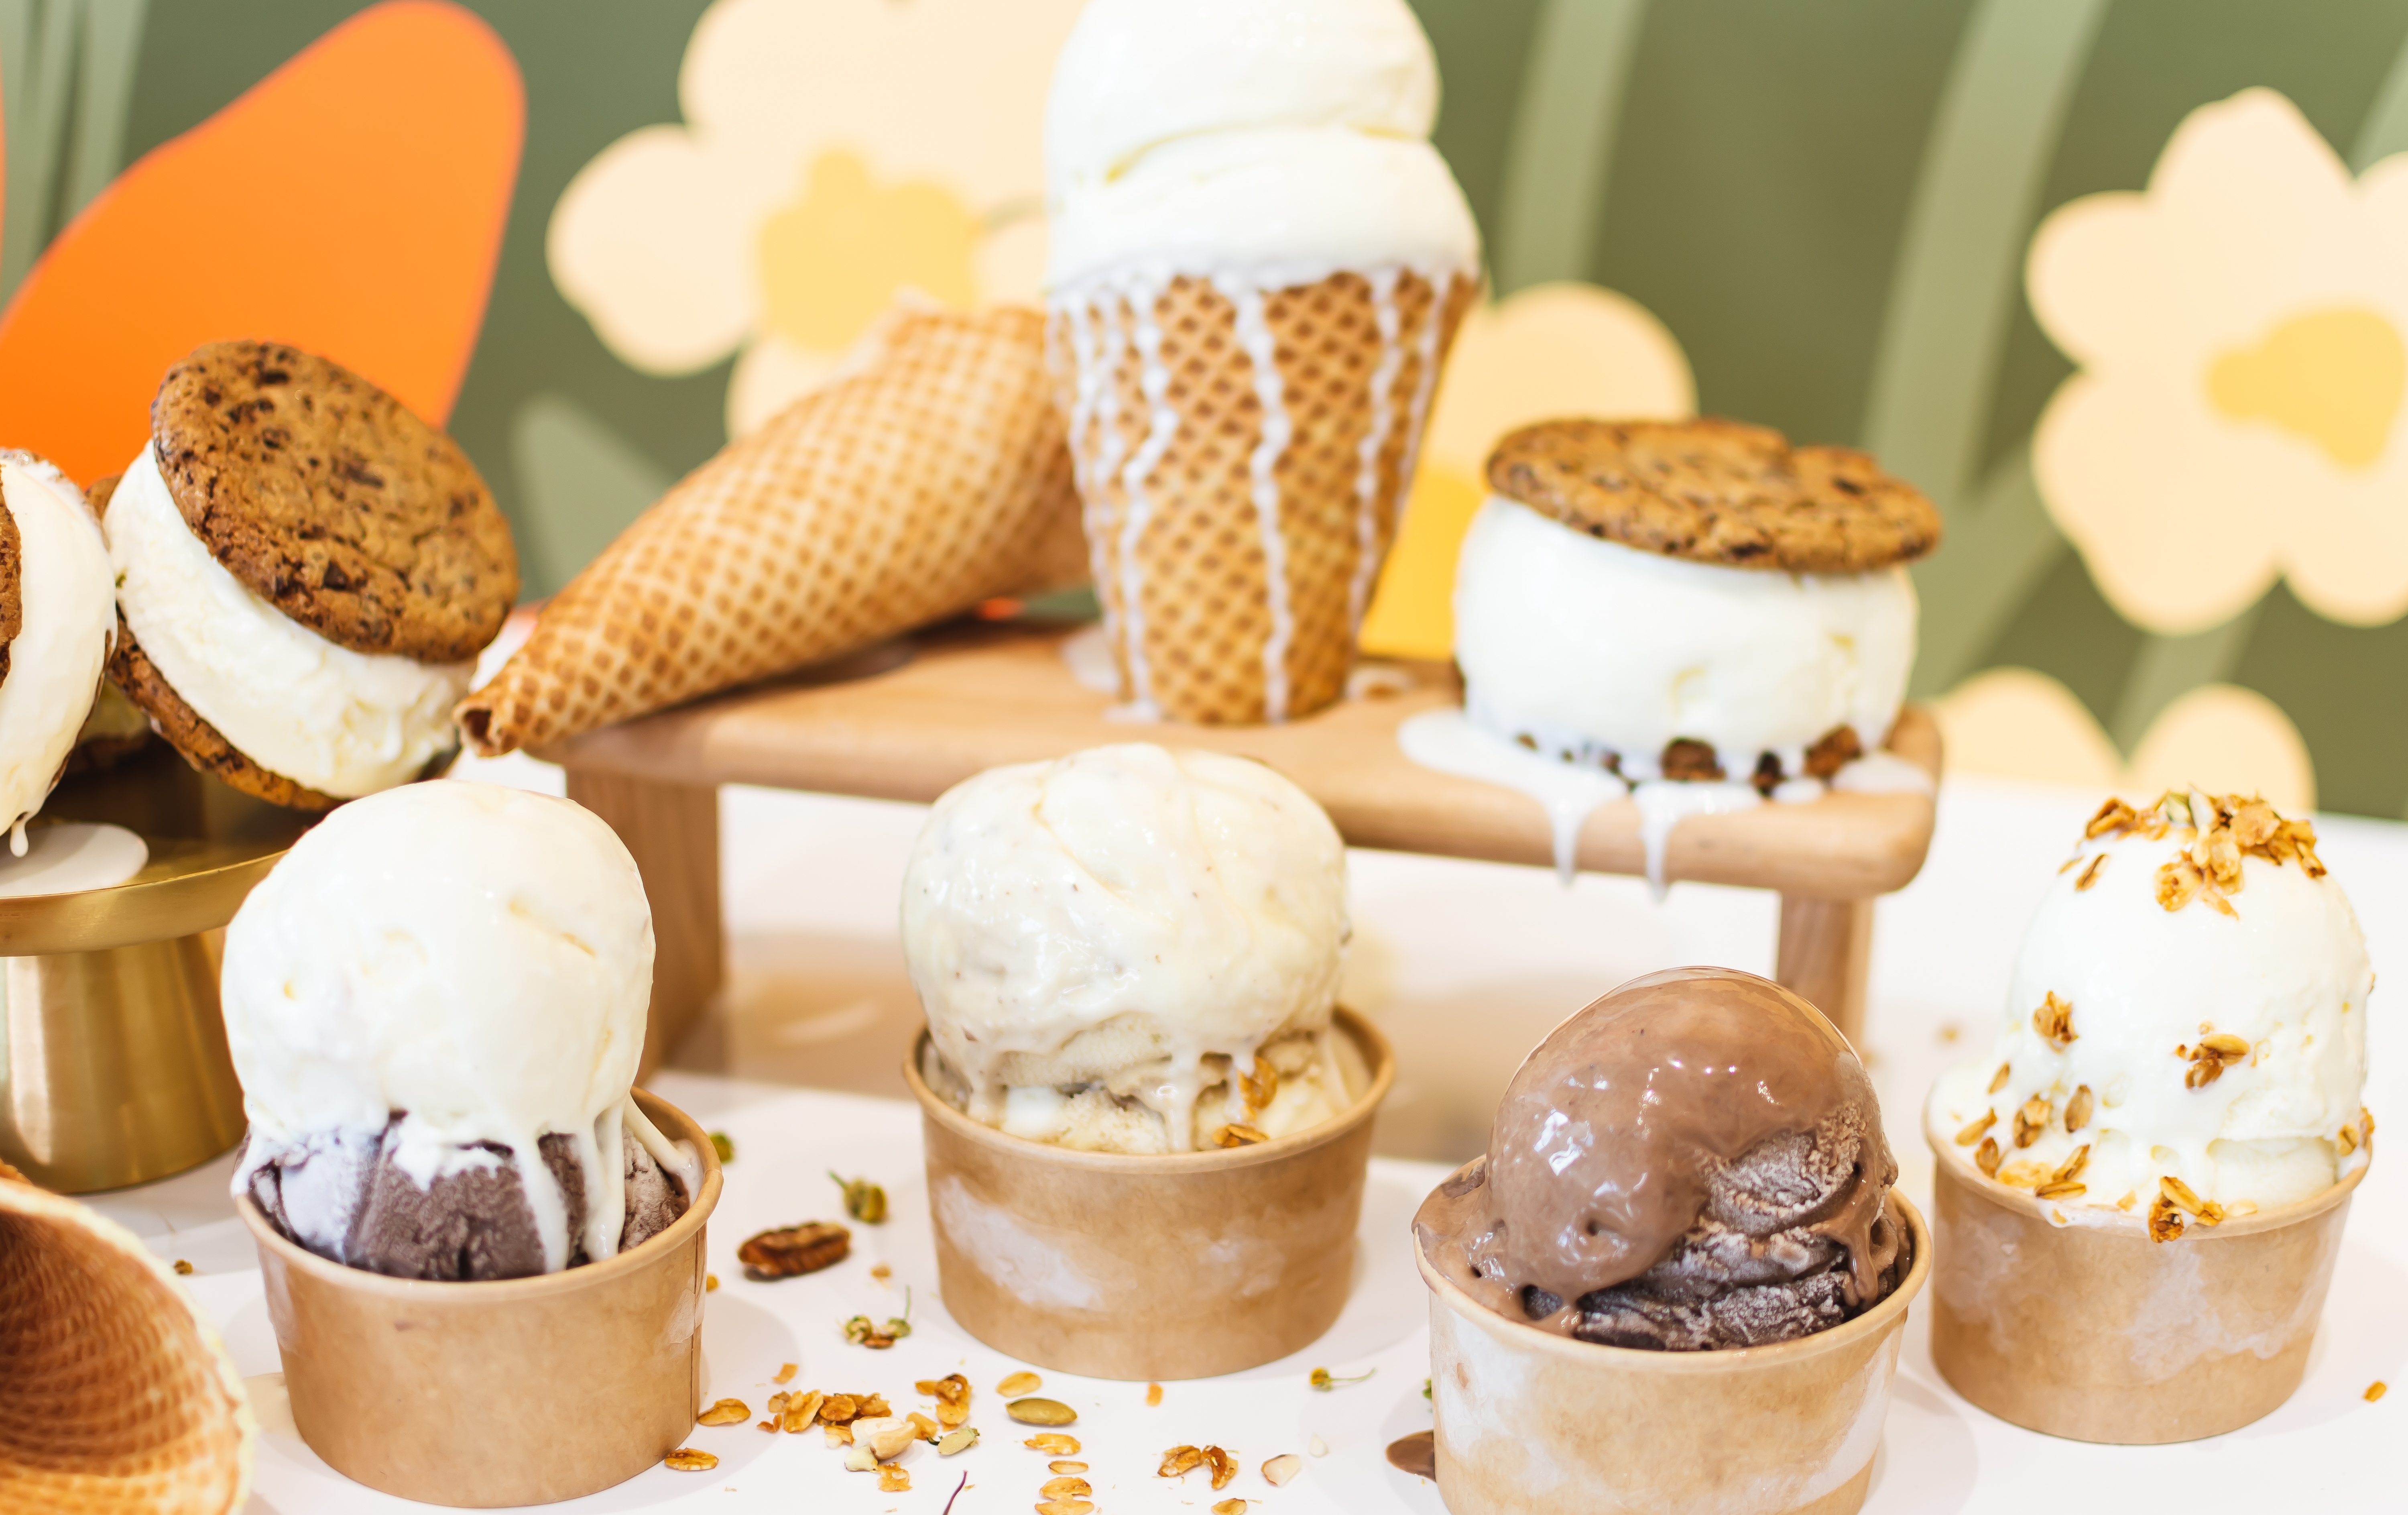 Ice cream cones, scoops, and sandwiches from Honeychild’s Sweet Creams